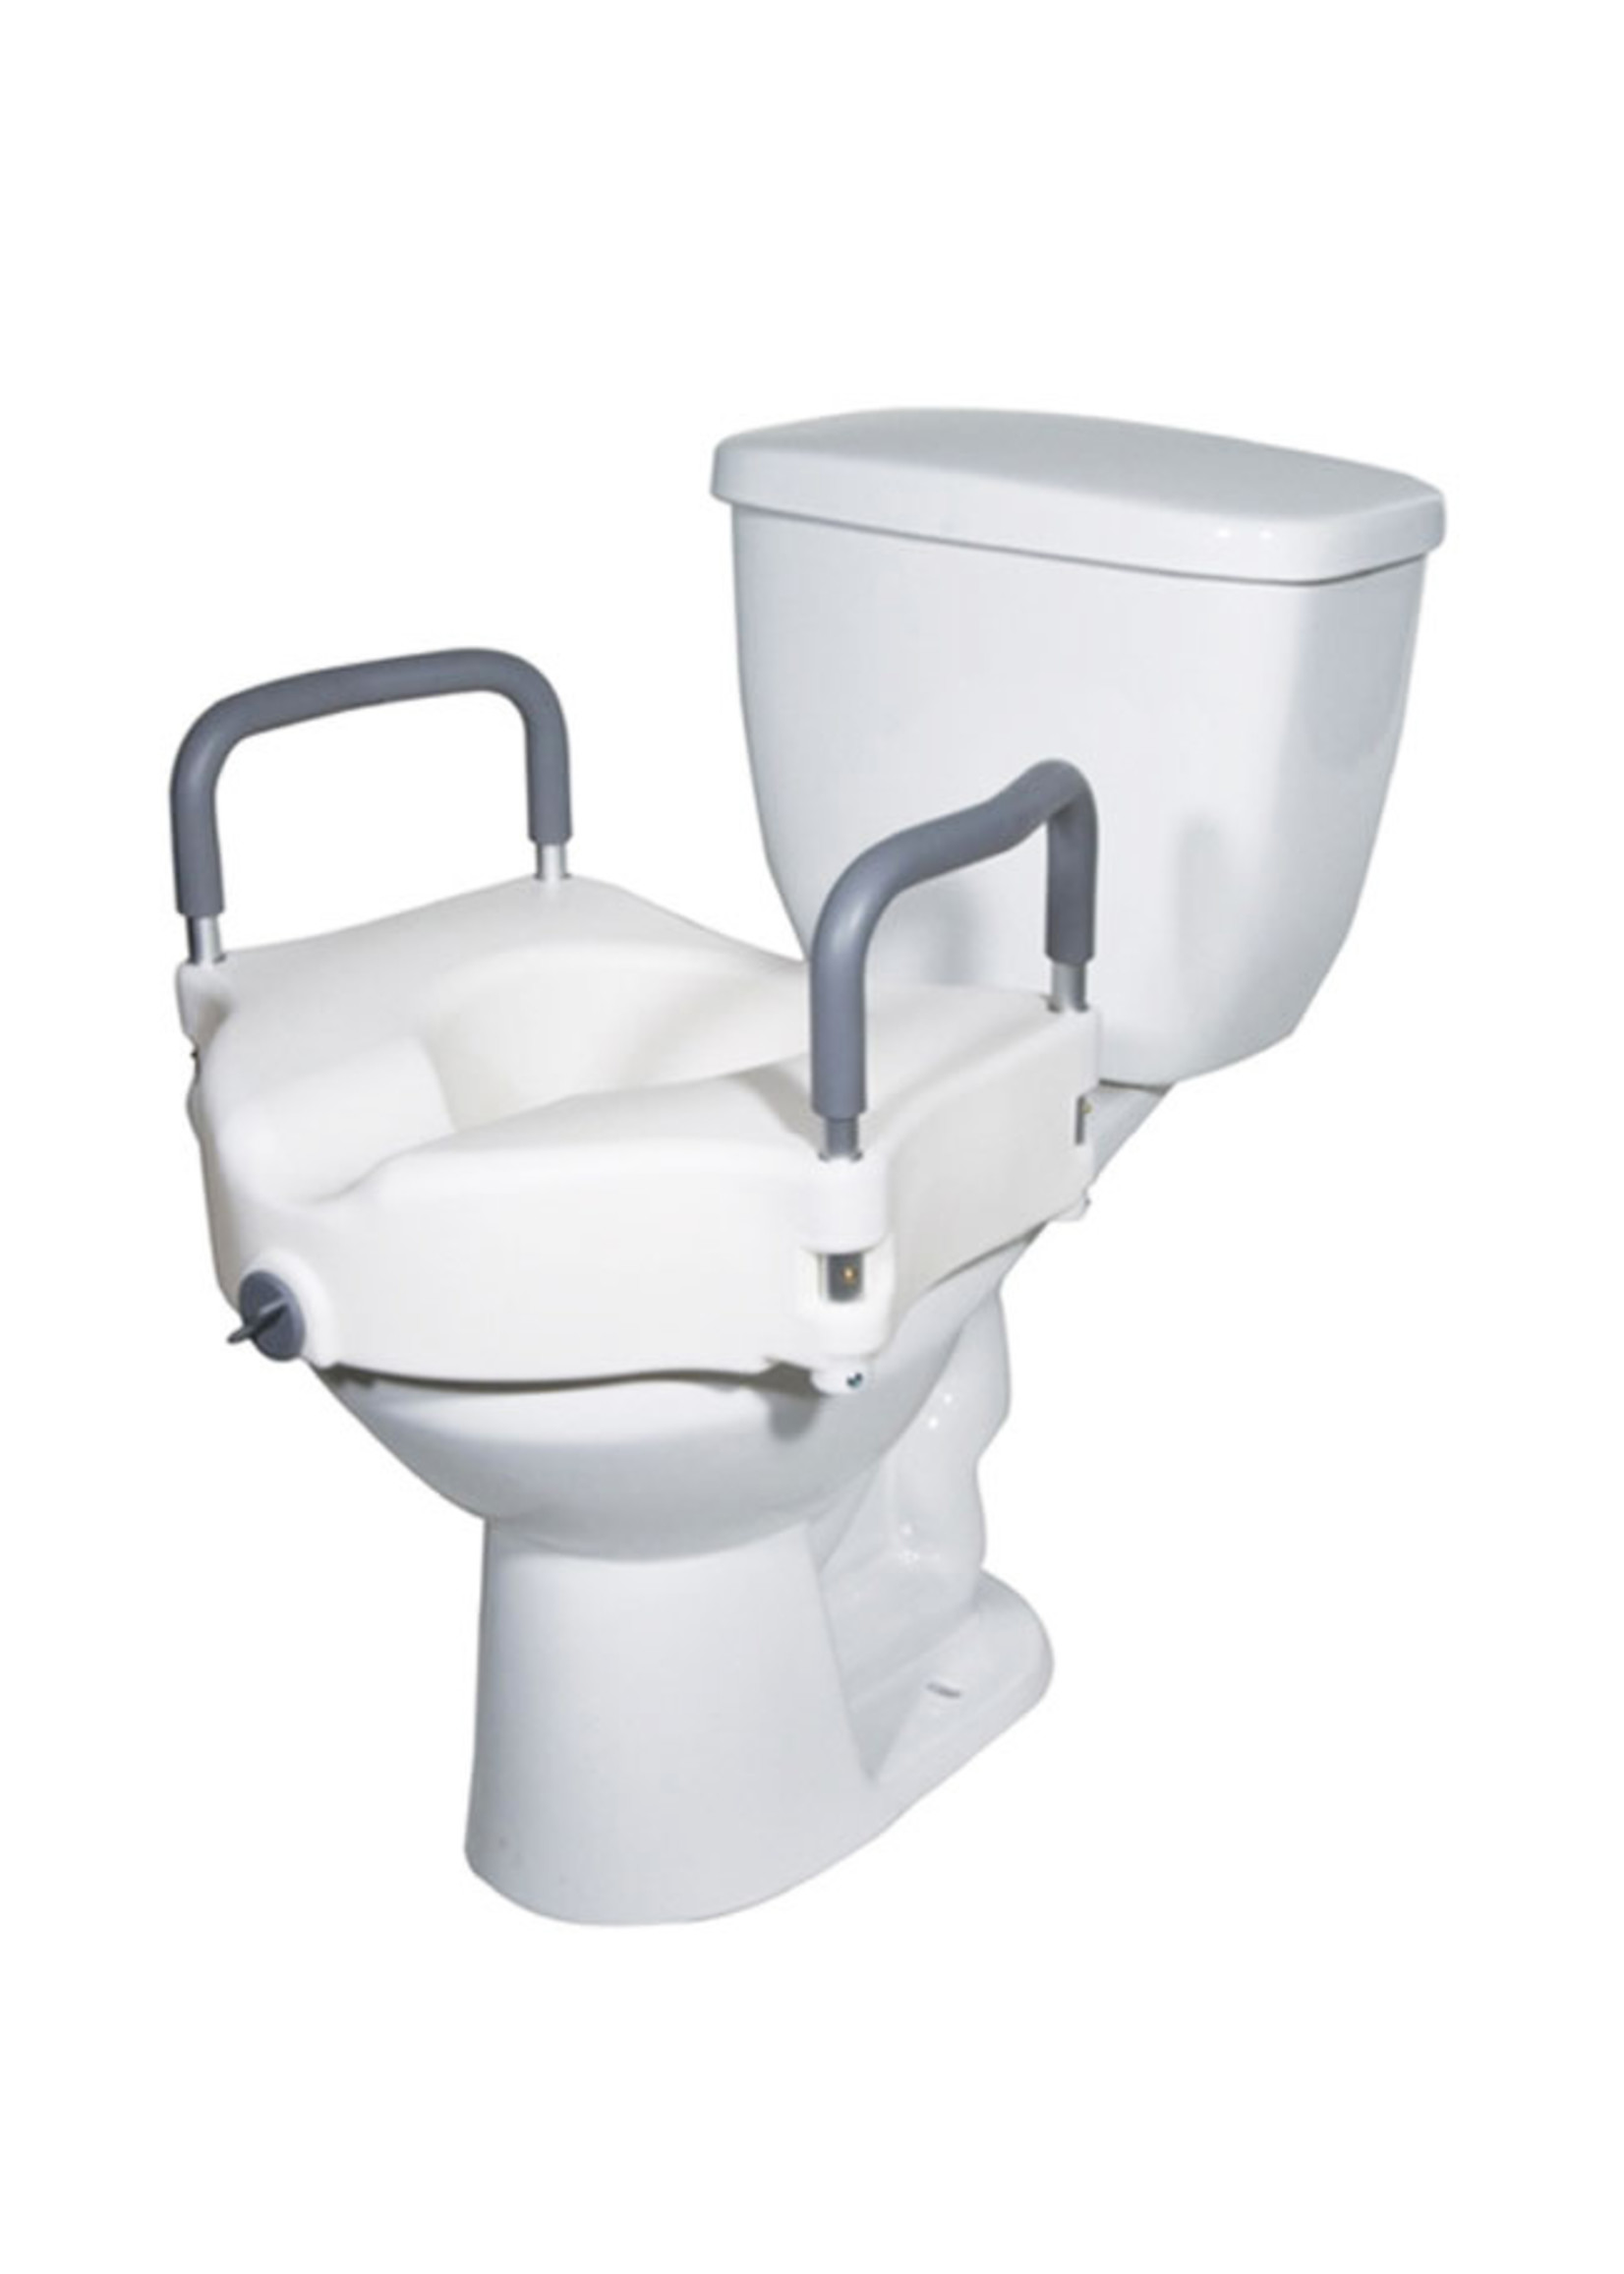 MOBB Locking Raised Toilet Seat with Removable Arms